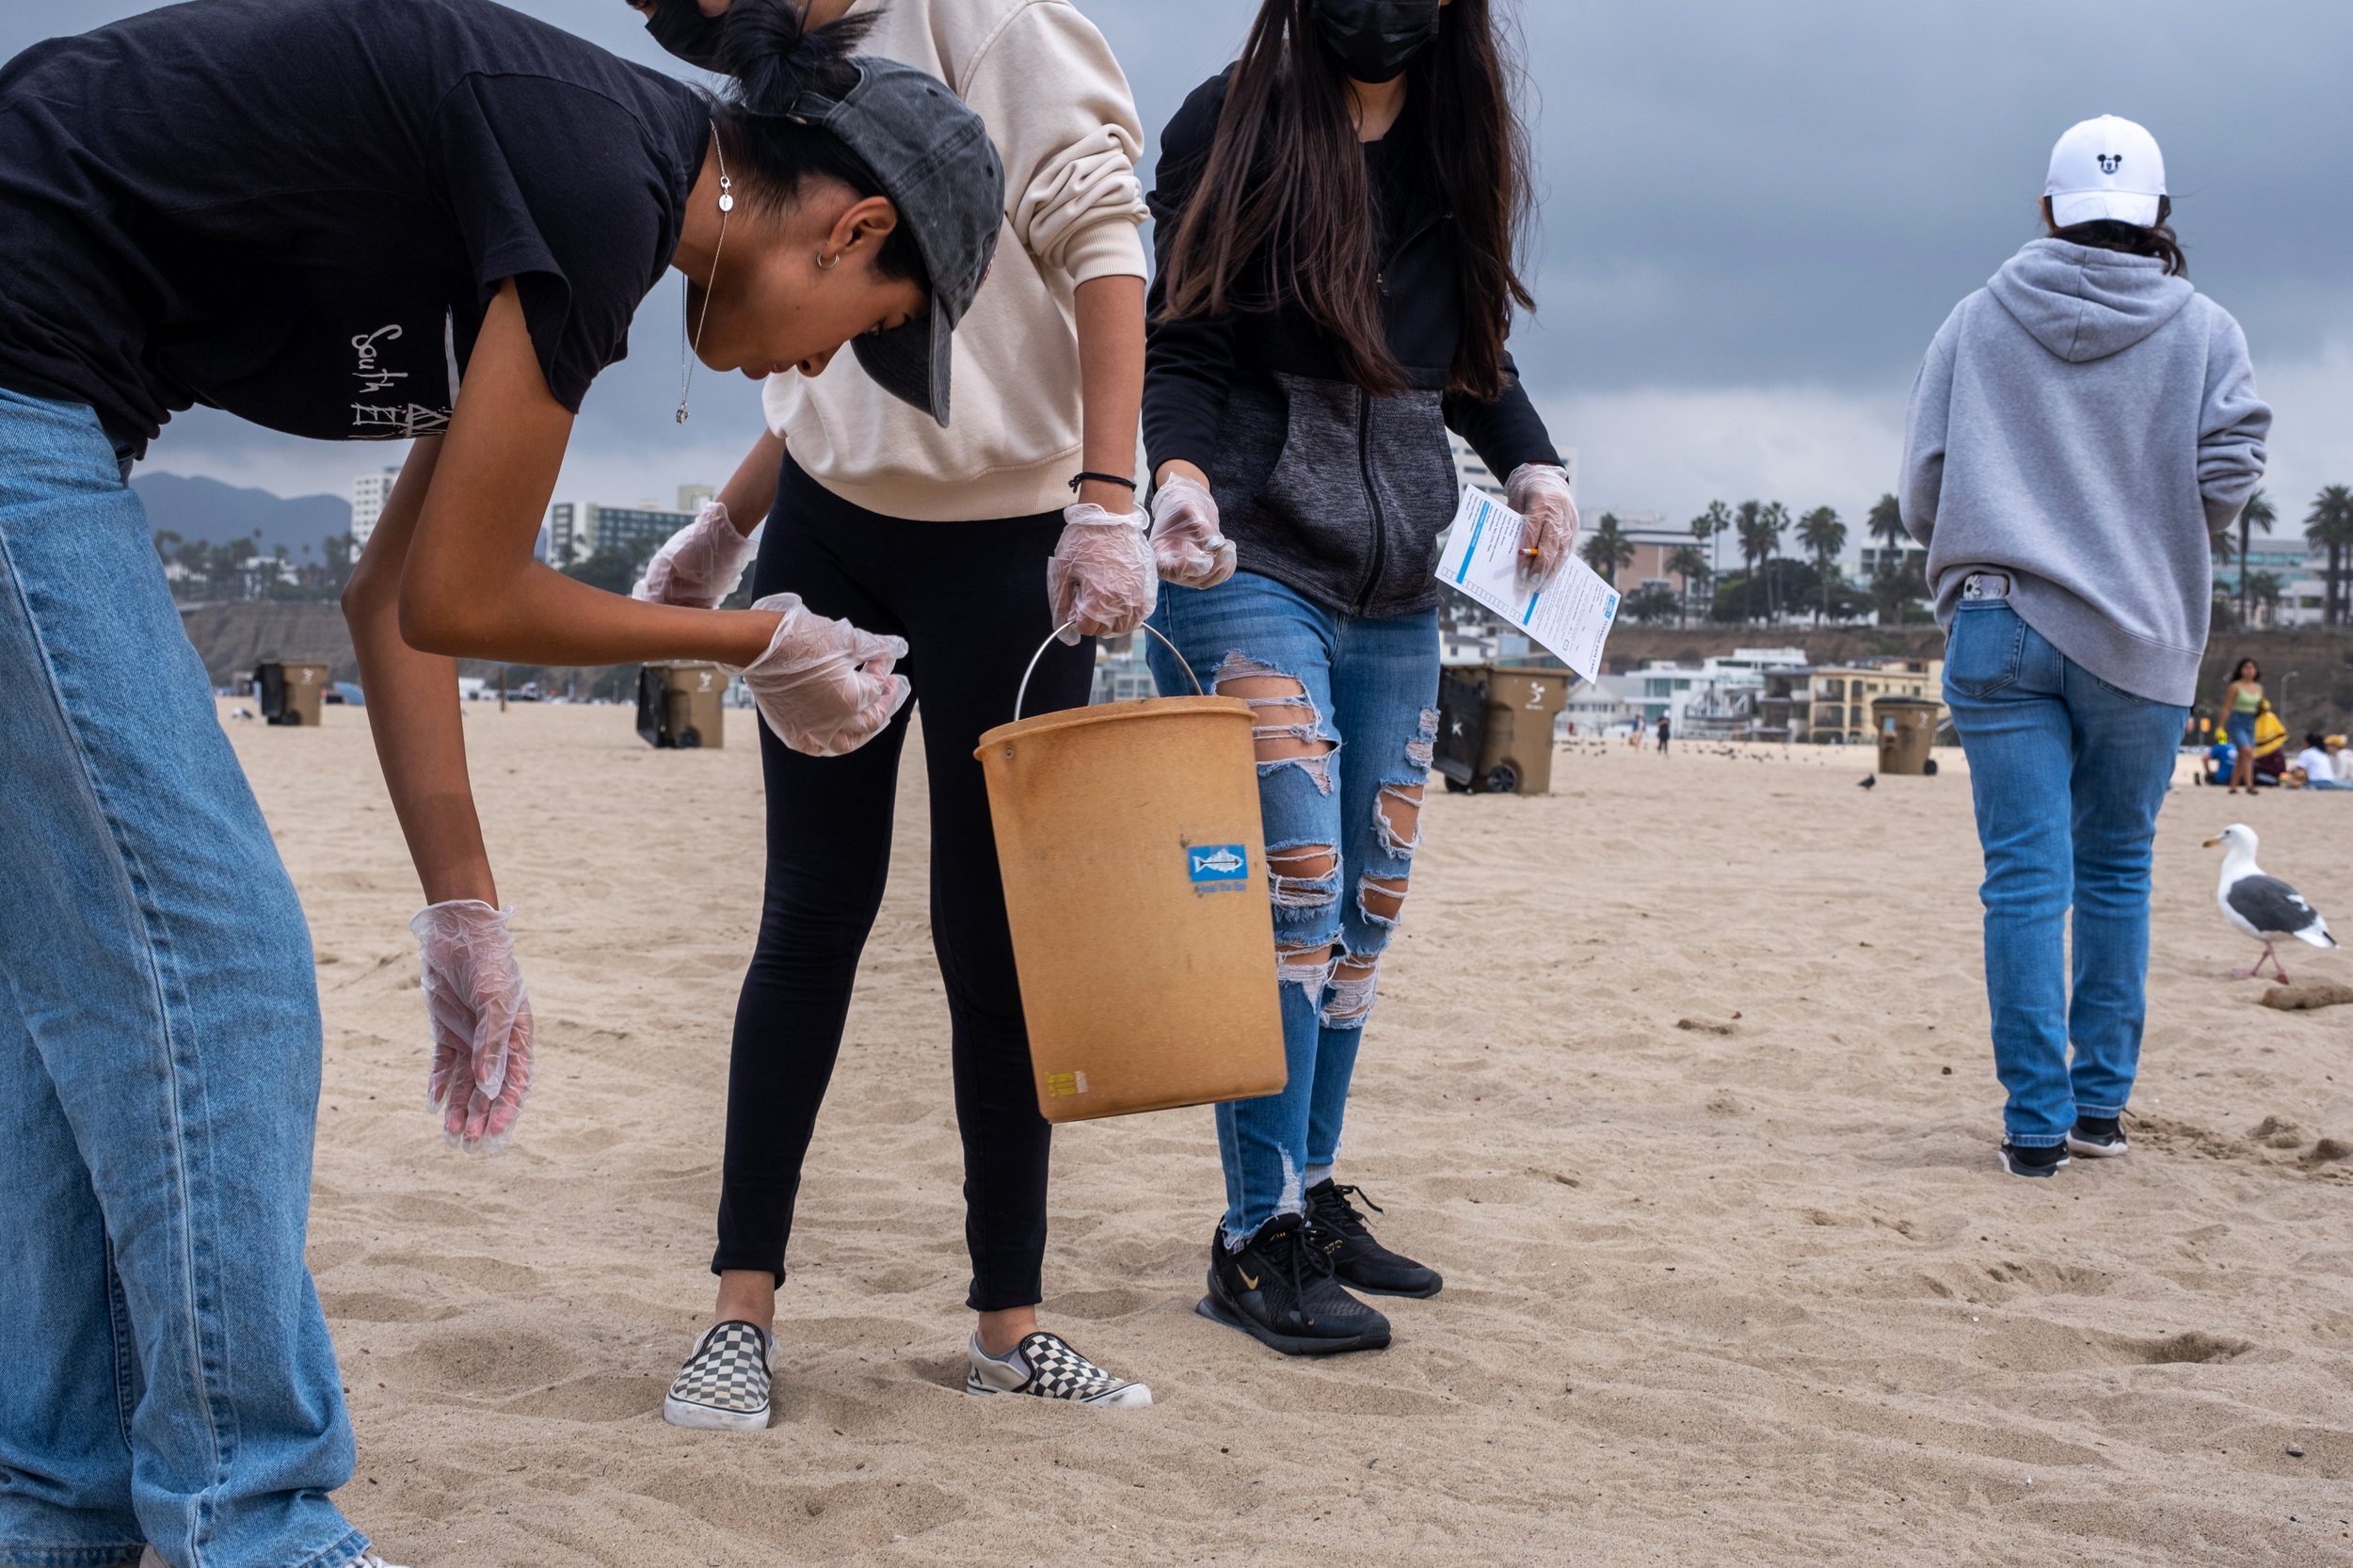  Volunteers pick up trash on the beach, while participating at Coastal Cleanup Day, led by Heal the Bay in Santa Monica Calif. on Saturday, September 17, 2022. (Anna Sophia Moltke | The Corsair) 